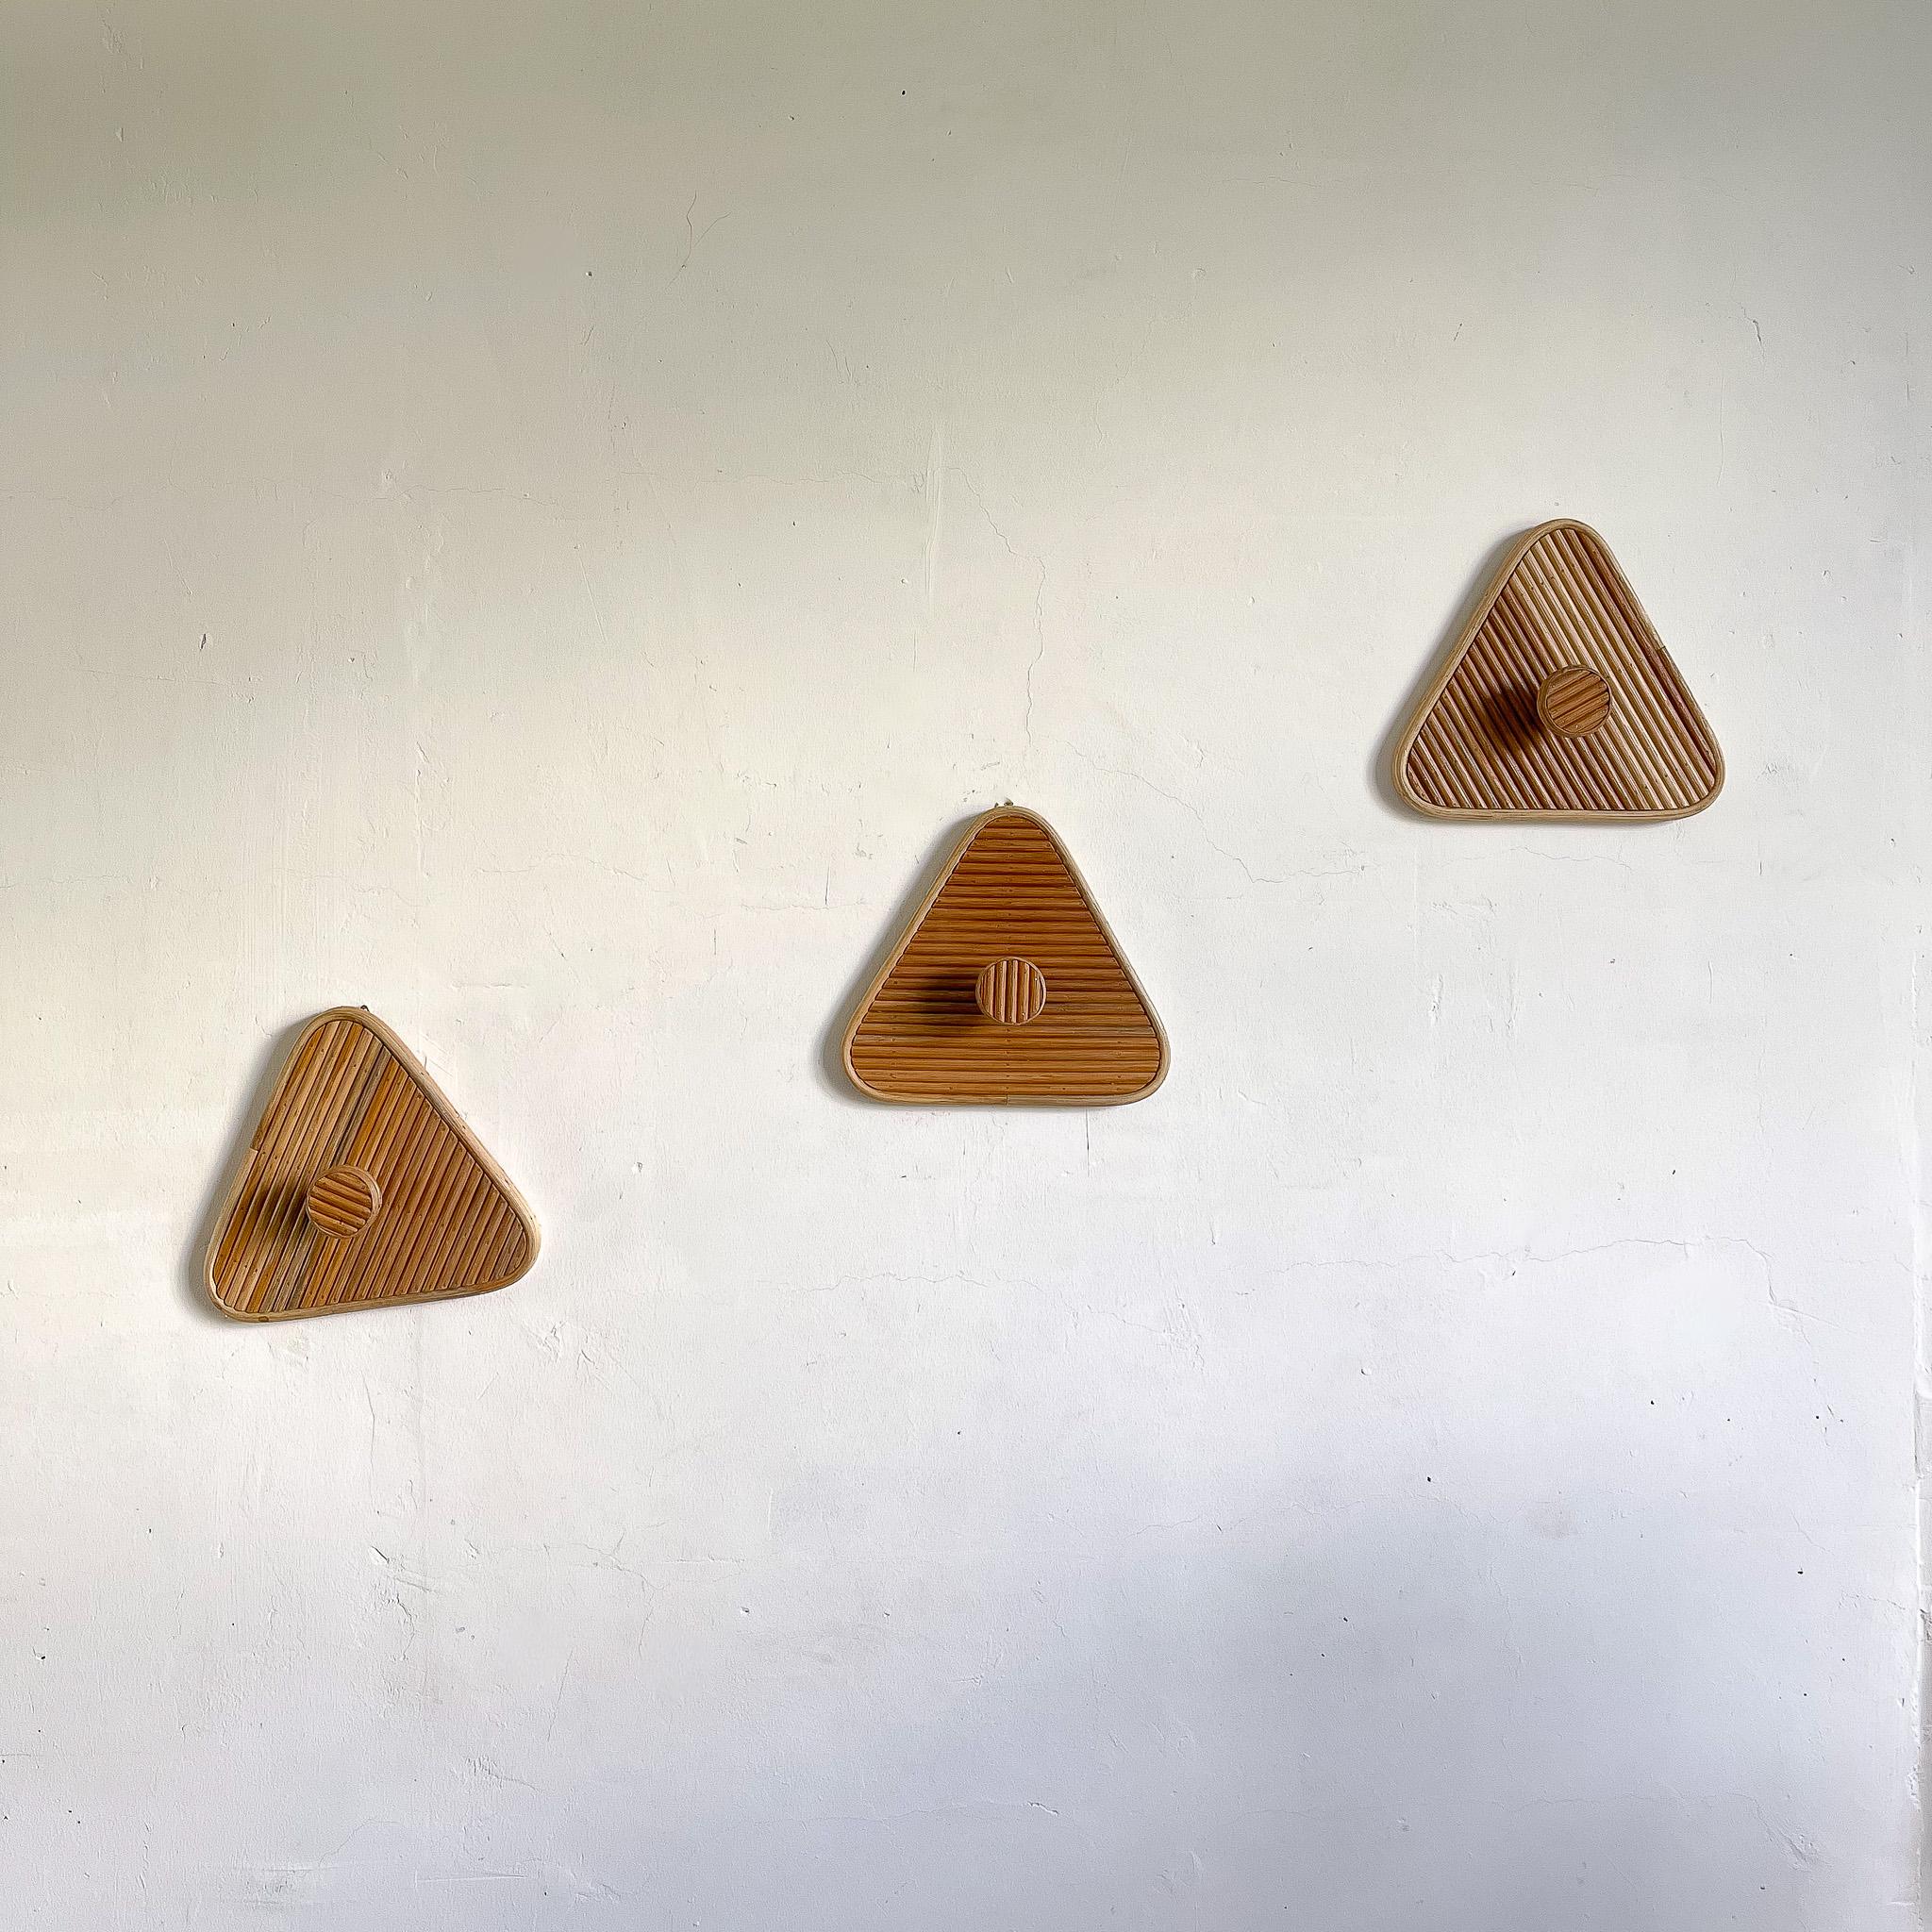 This elegant Triangle Shaped Rattan Wall Hook is the perfect addition to any room. Its mid-century Italian design in a rattan core with a triangle shape is ideal for entryways, bathrooms, and in kid's bedrooms. Installation is simple, and its modern